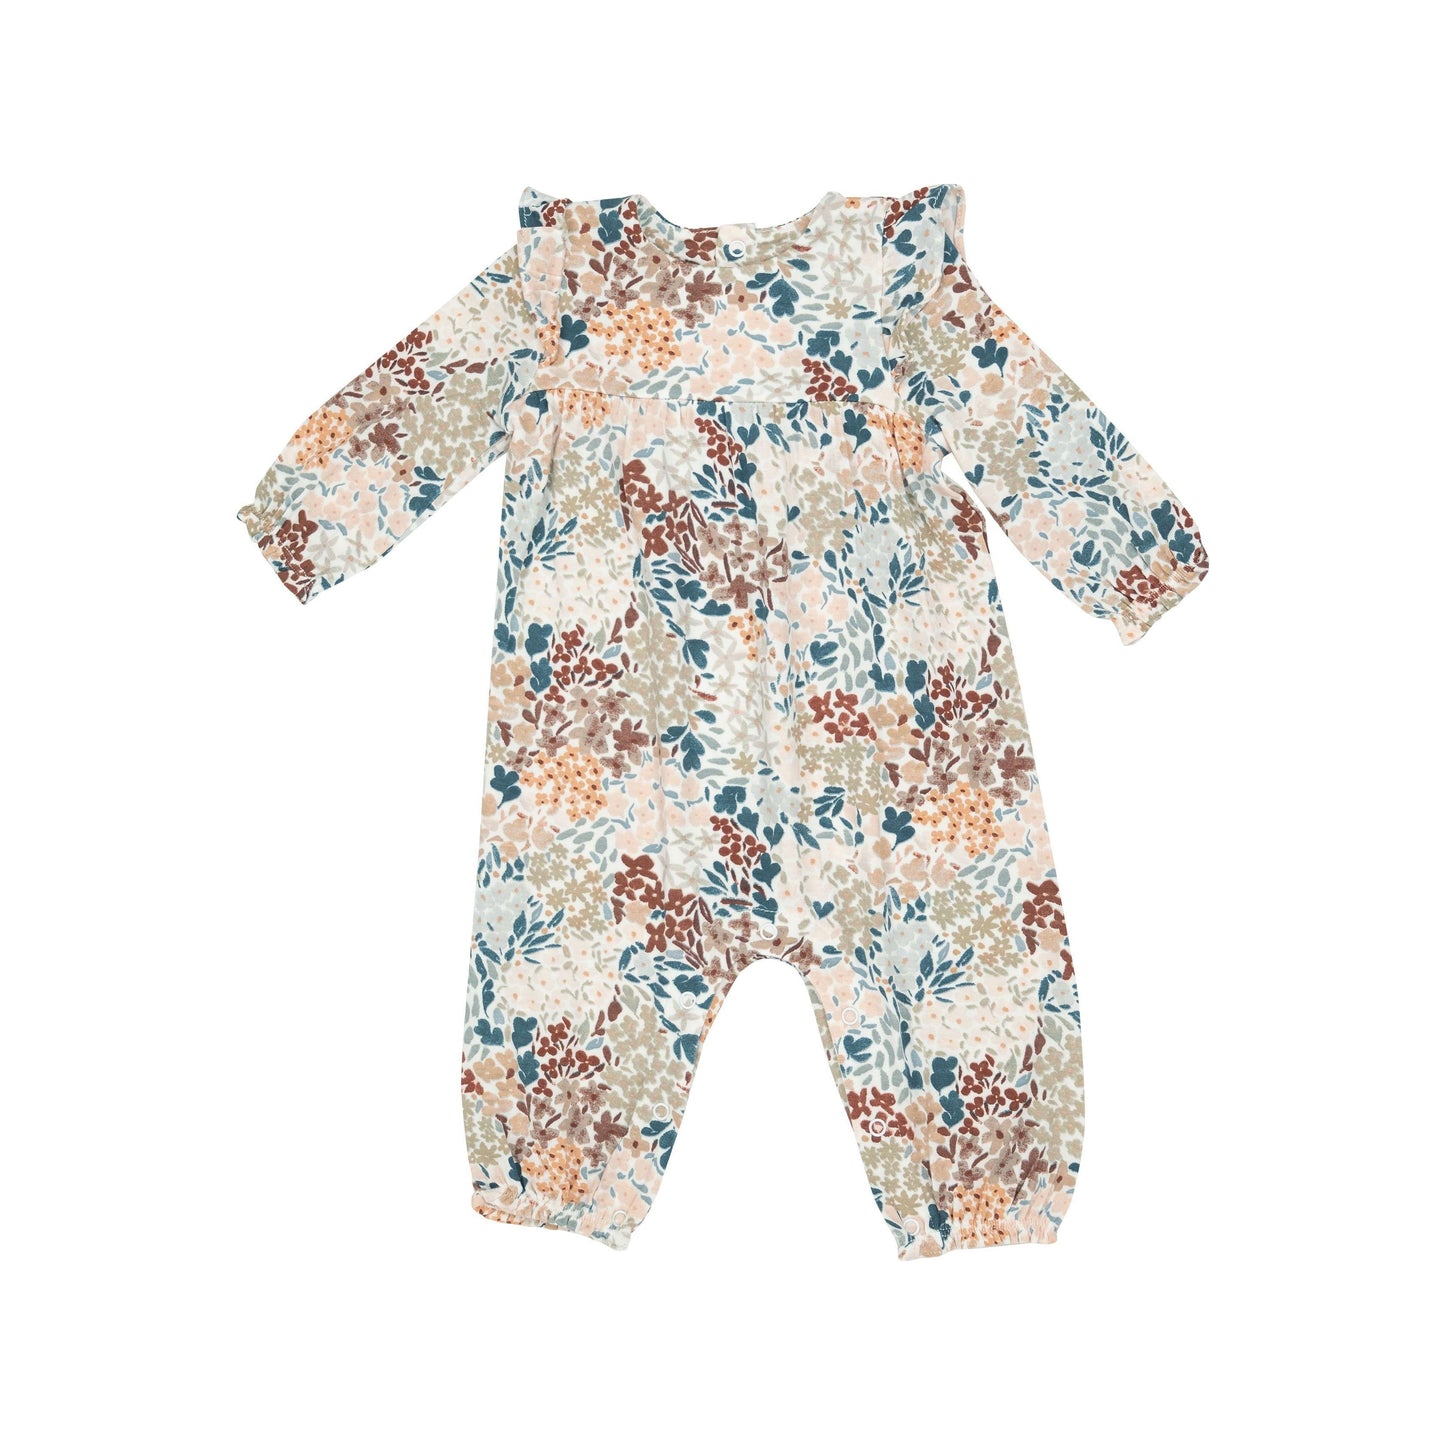 Painted Fall Floral Ruffle Sleeper